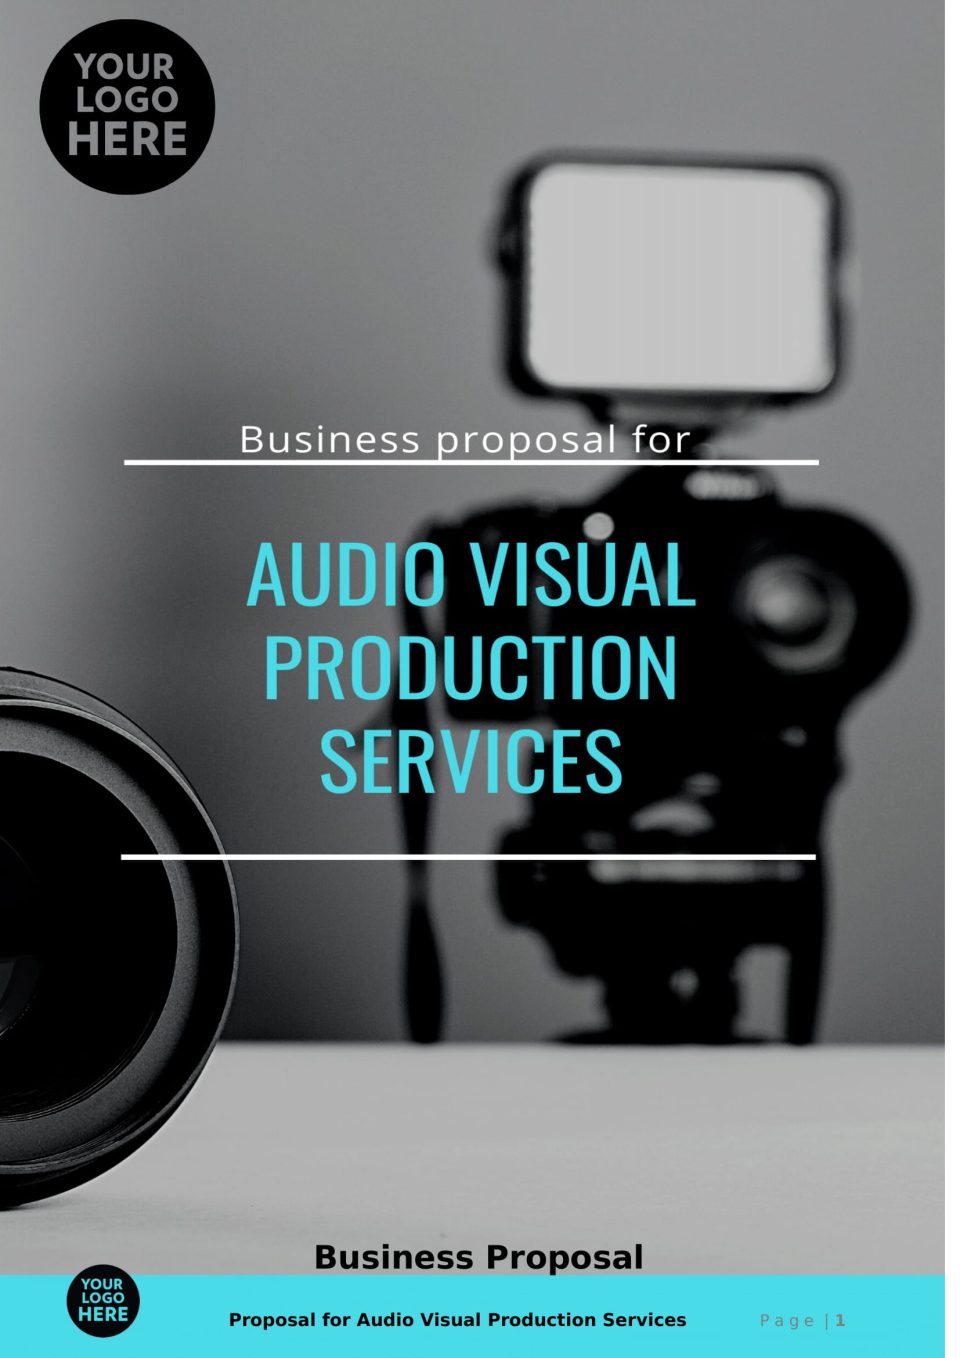 Audio Visual Production Services Proposal template 01